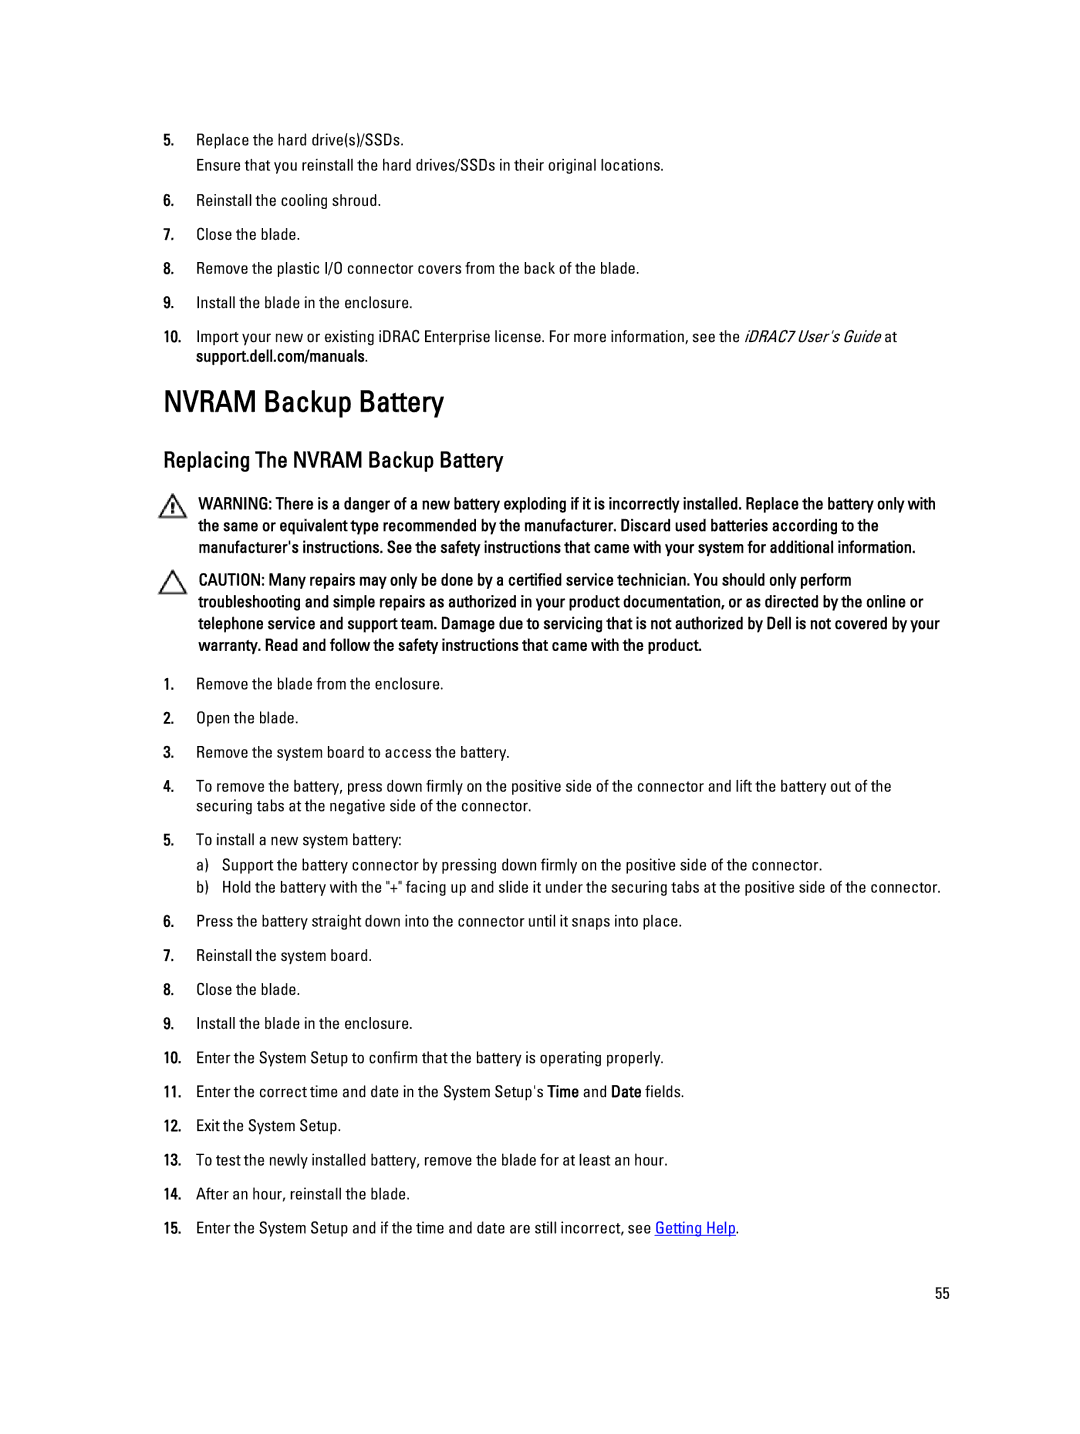 Dell M620 owner manual Replacing The Nvram Backup Battery 